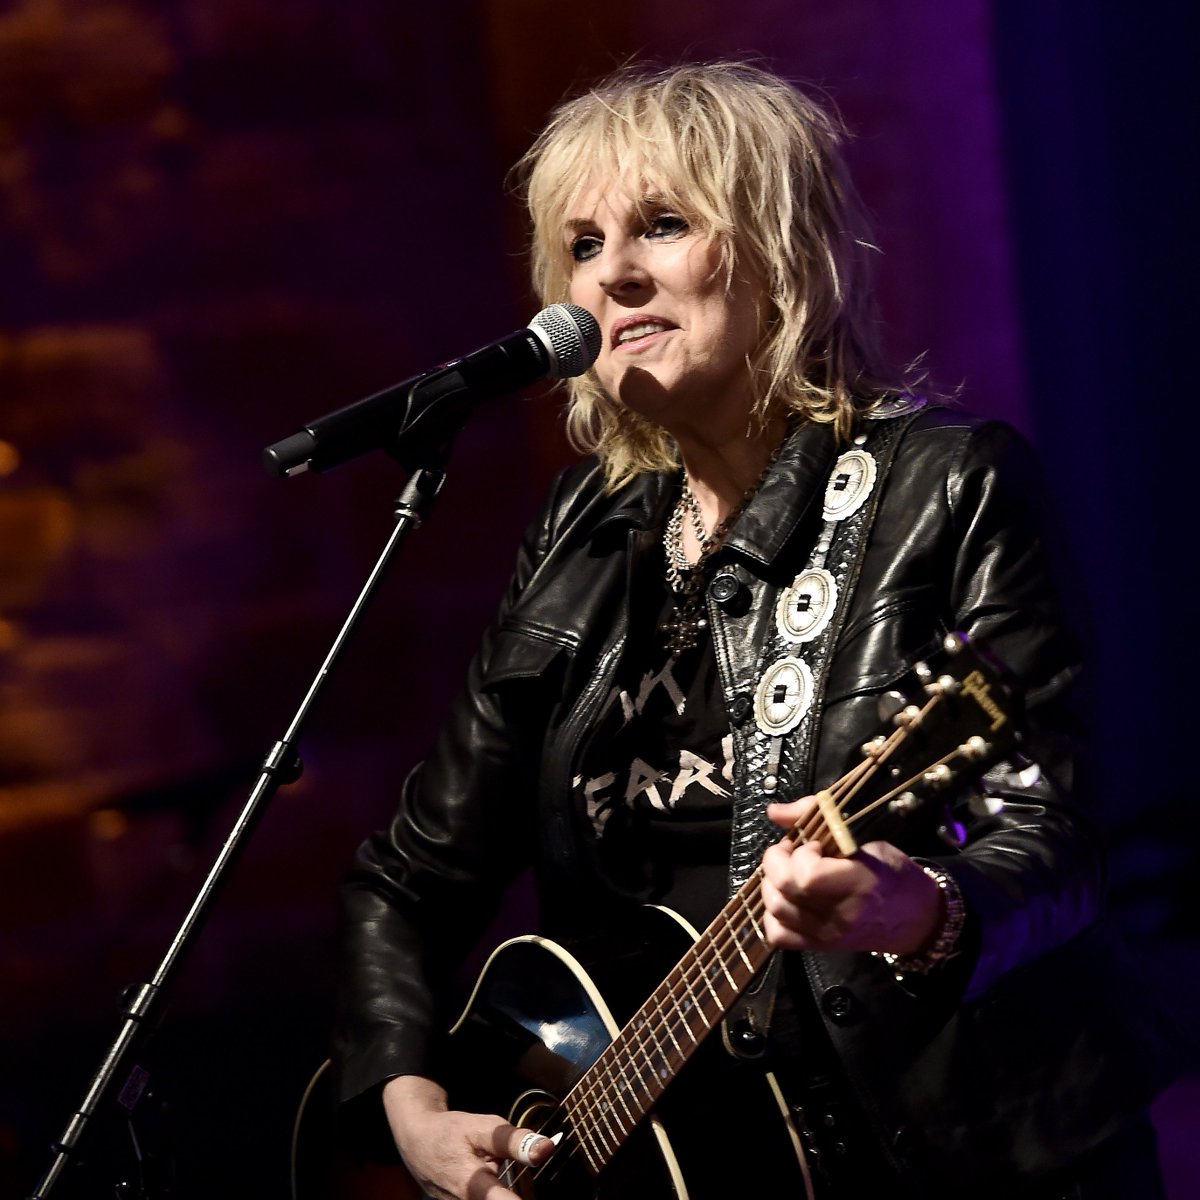 OBW S5 finale: genius Lucinda Williams on the pure poetry of @WillieNelson's Angel Flying Too Close, and how impossibly great it feels to go from being an Austin busker who studied him in the 70s...to covering one of her own songs w/him onstage. Hear here: bit.ly/3VNyclZ